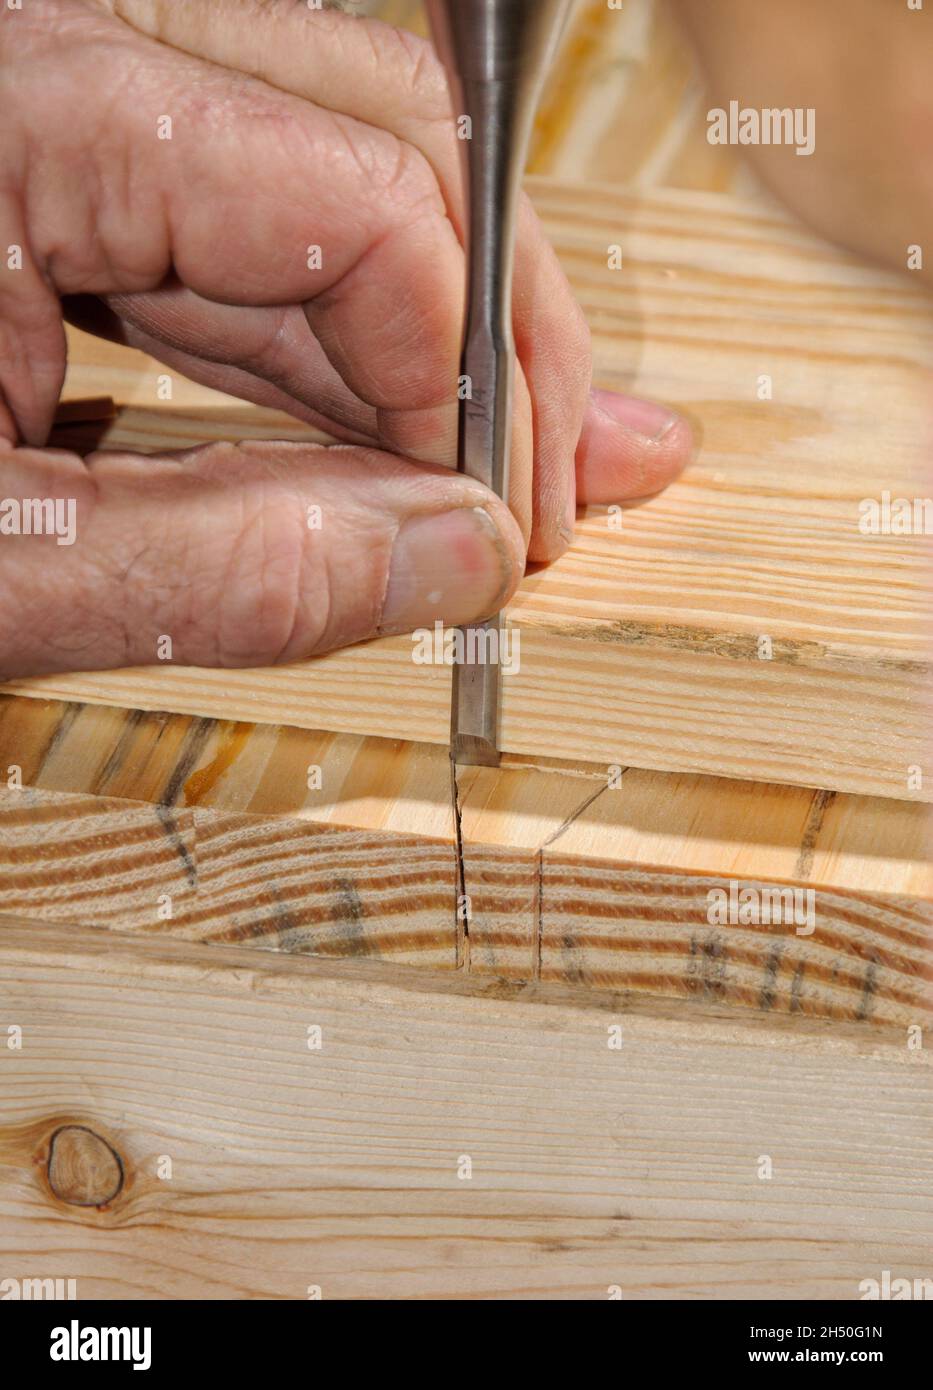 Craftsman cutting a dovetail joint with a chisel Stock Photo